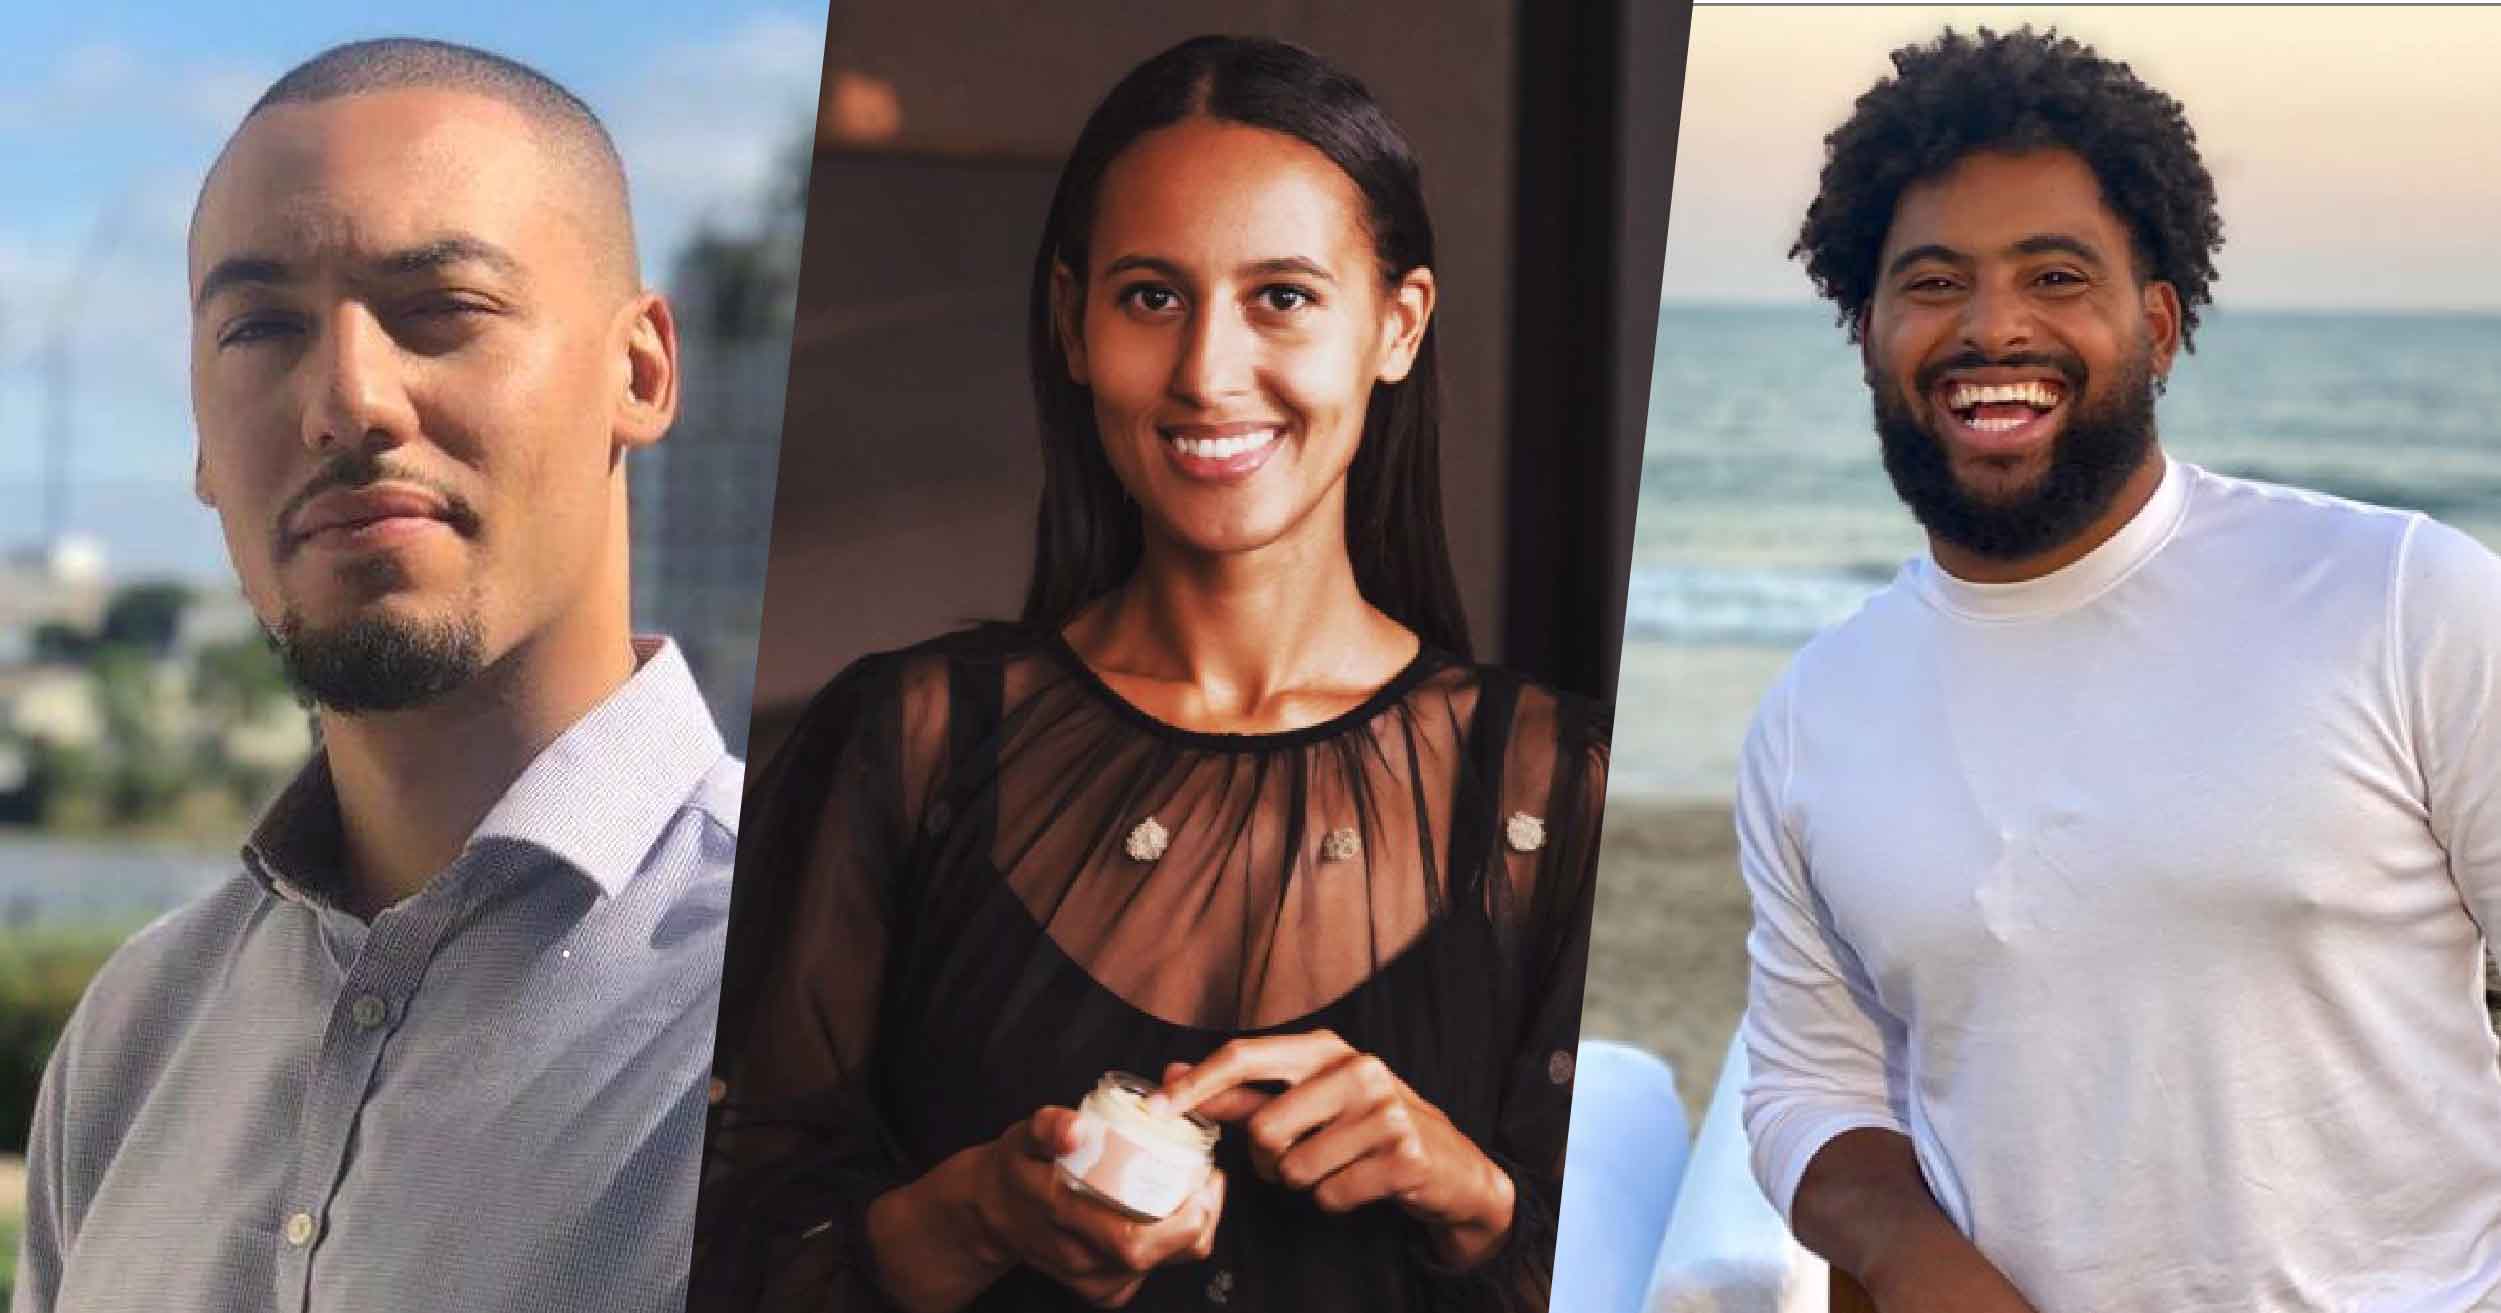 Three images of black CBD business owners aligned side by side